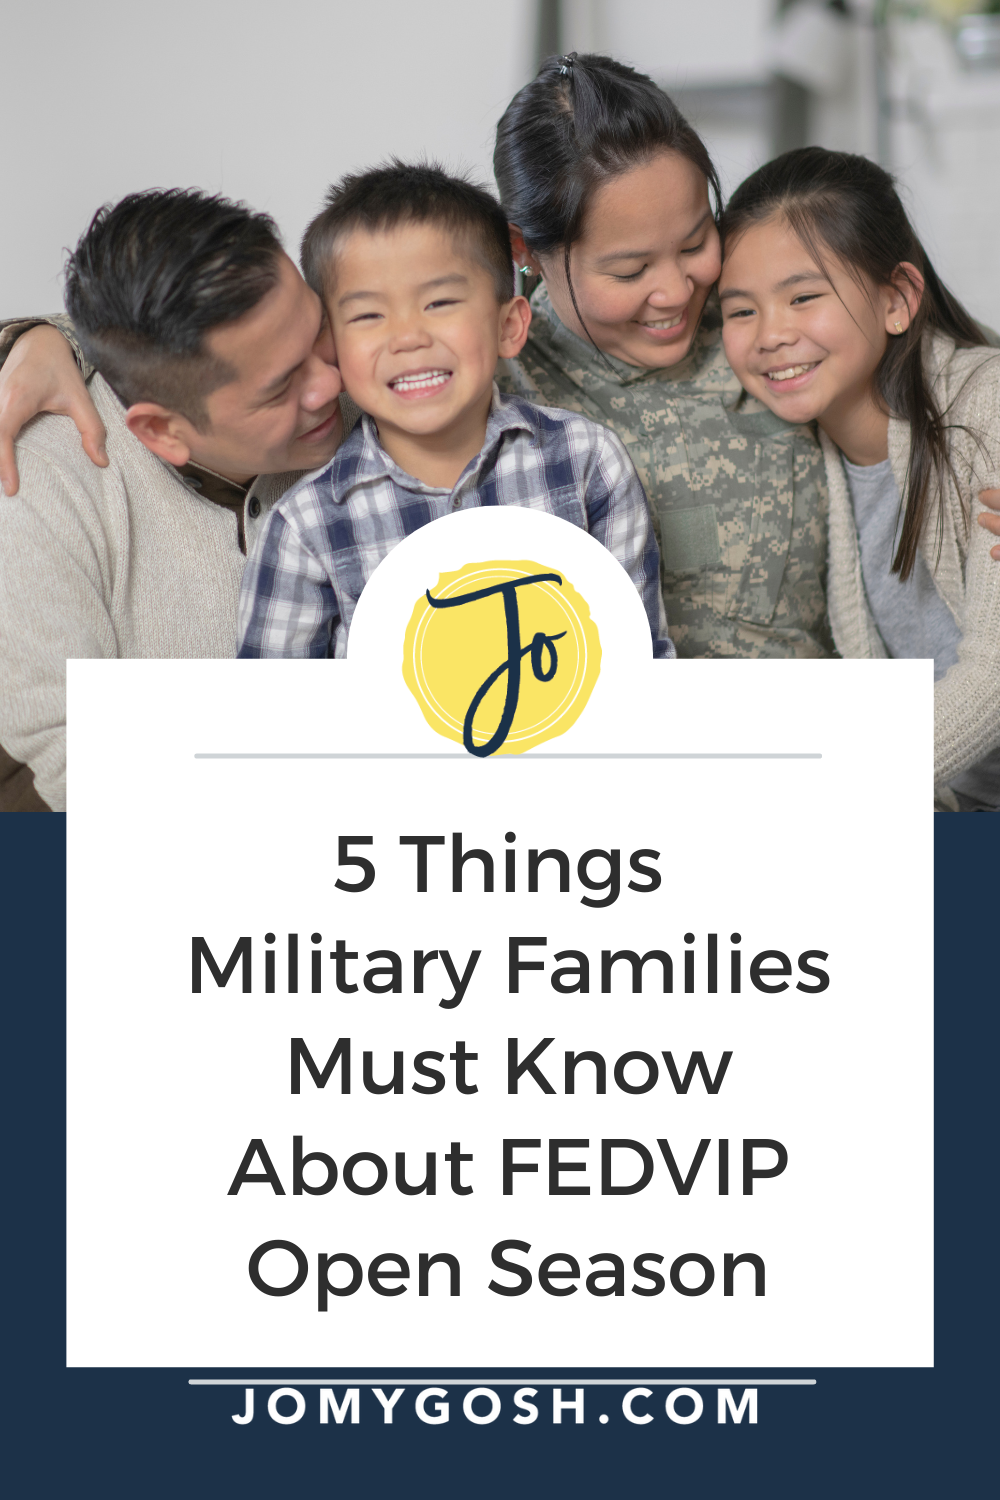 Here are 5 things military families must know about fedvip open season this year